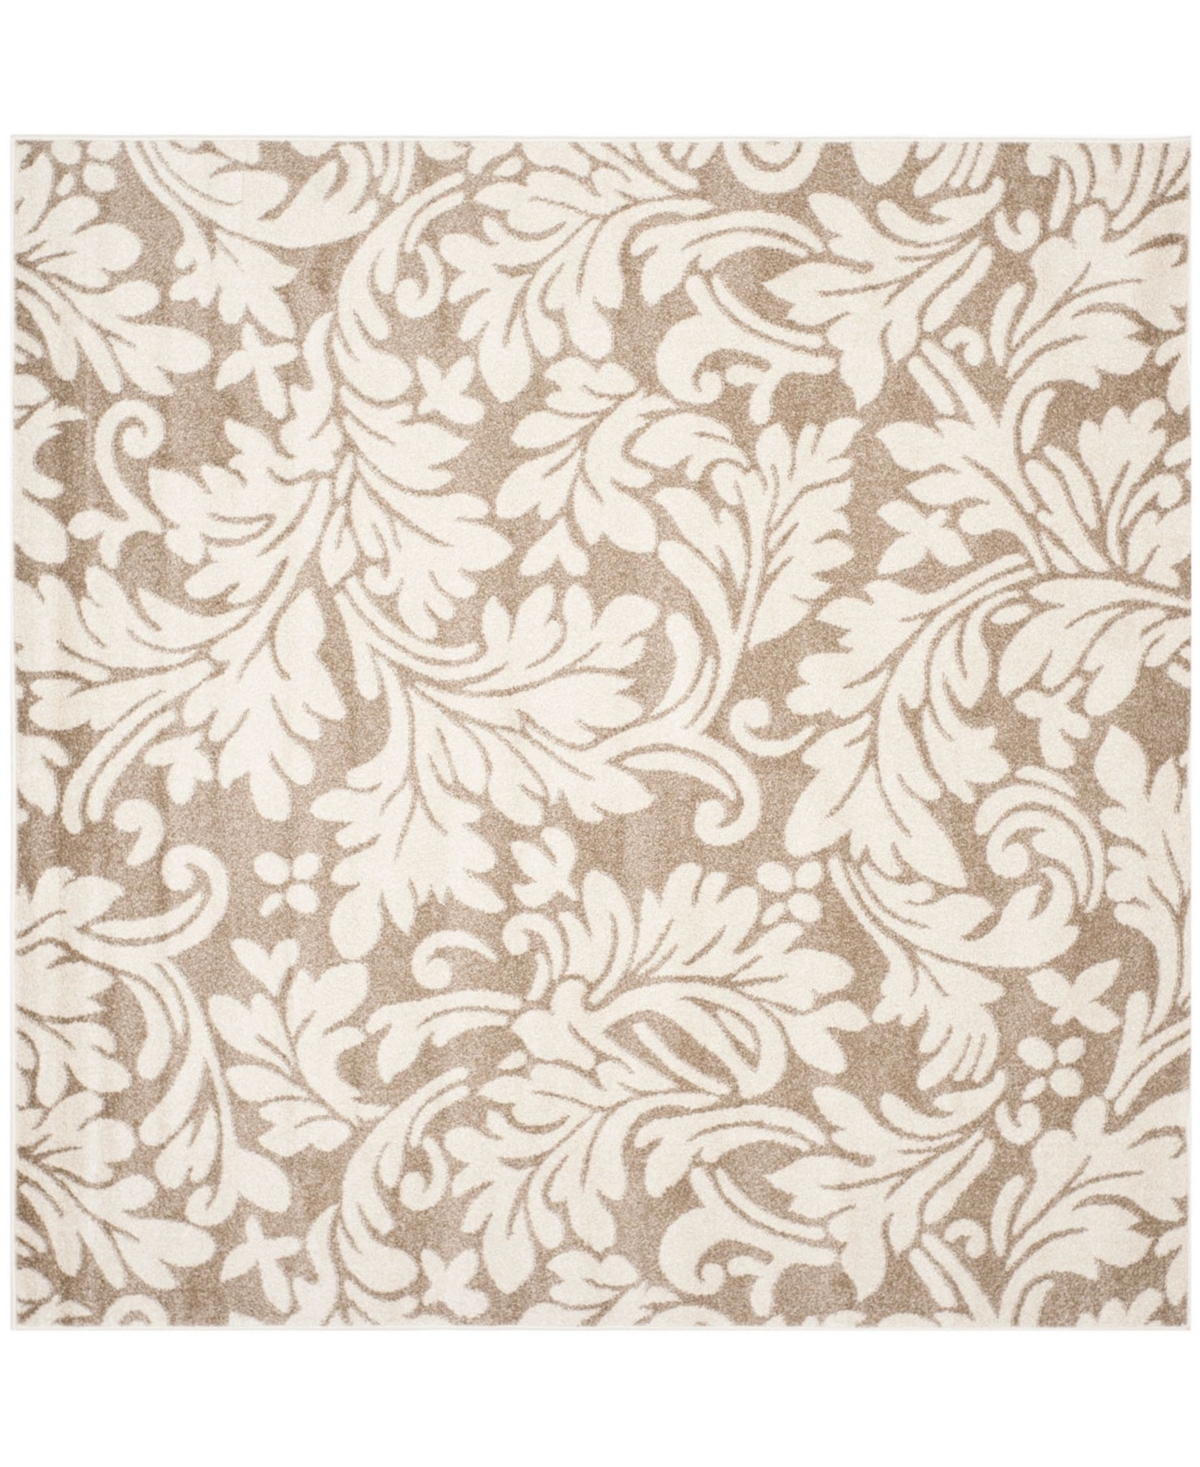 Safavieh Amherst Wheat and Beige 9' x 9' Square Area Rug - Beige